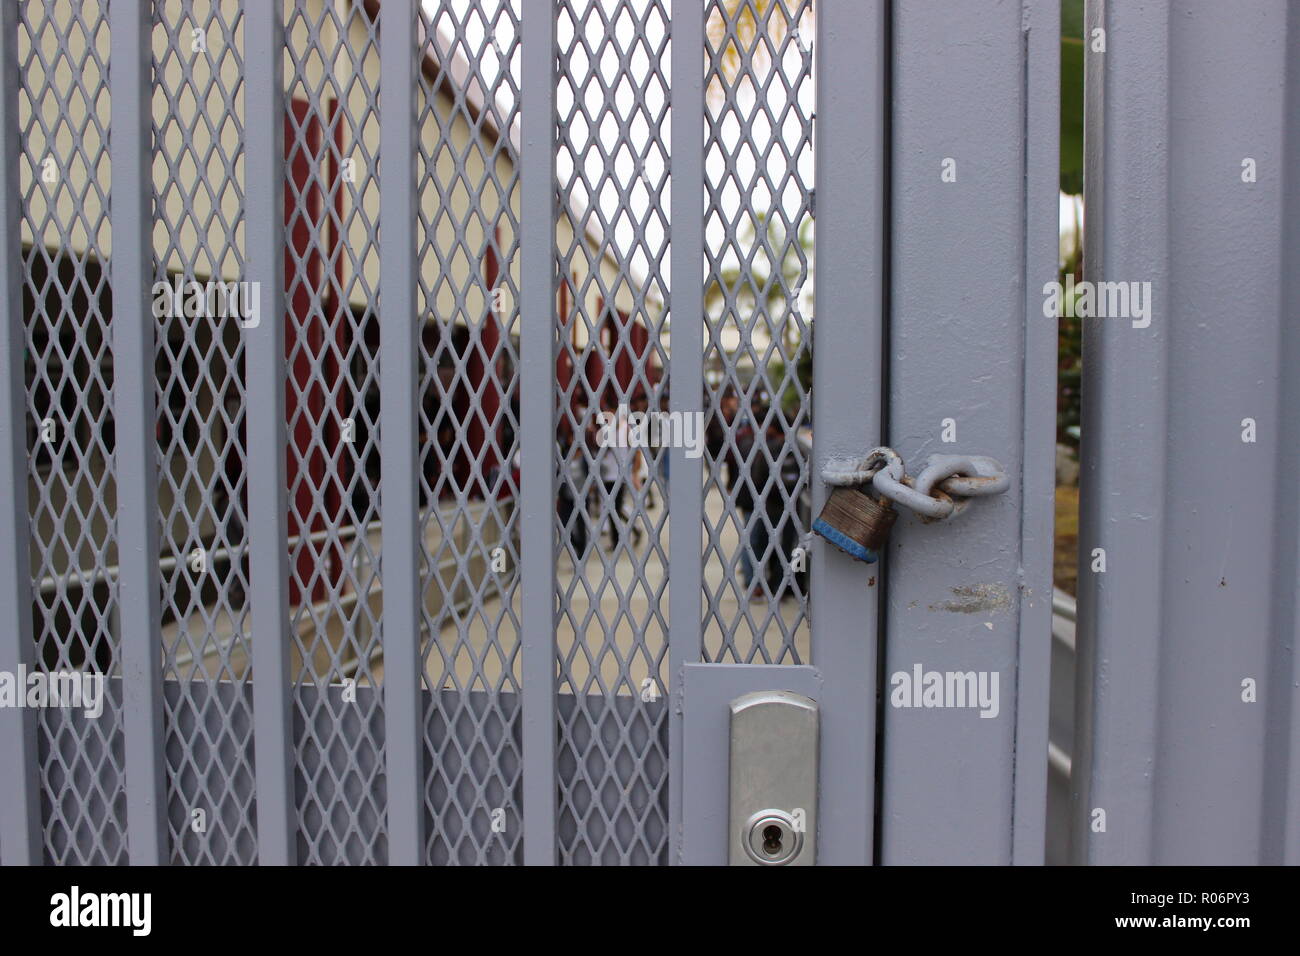 Closed high school campus - a lock on a heavy gate protects students from shootings and violence Stock Photo